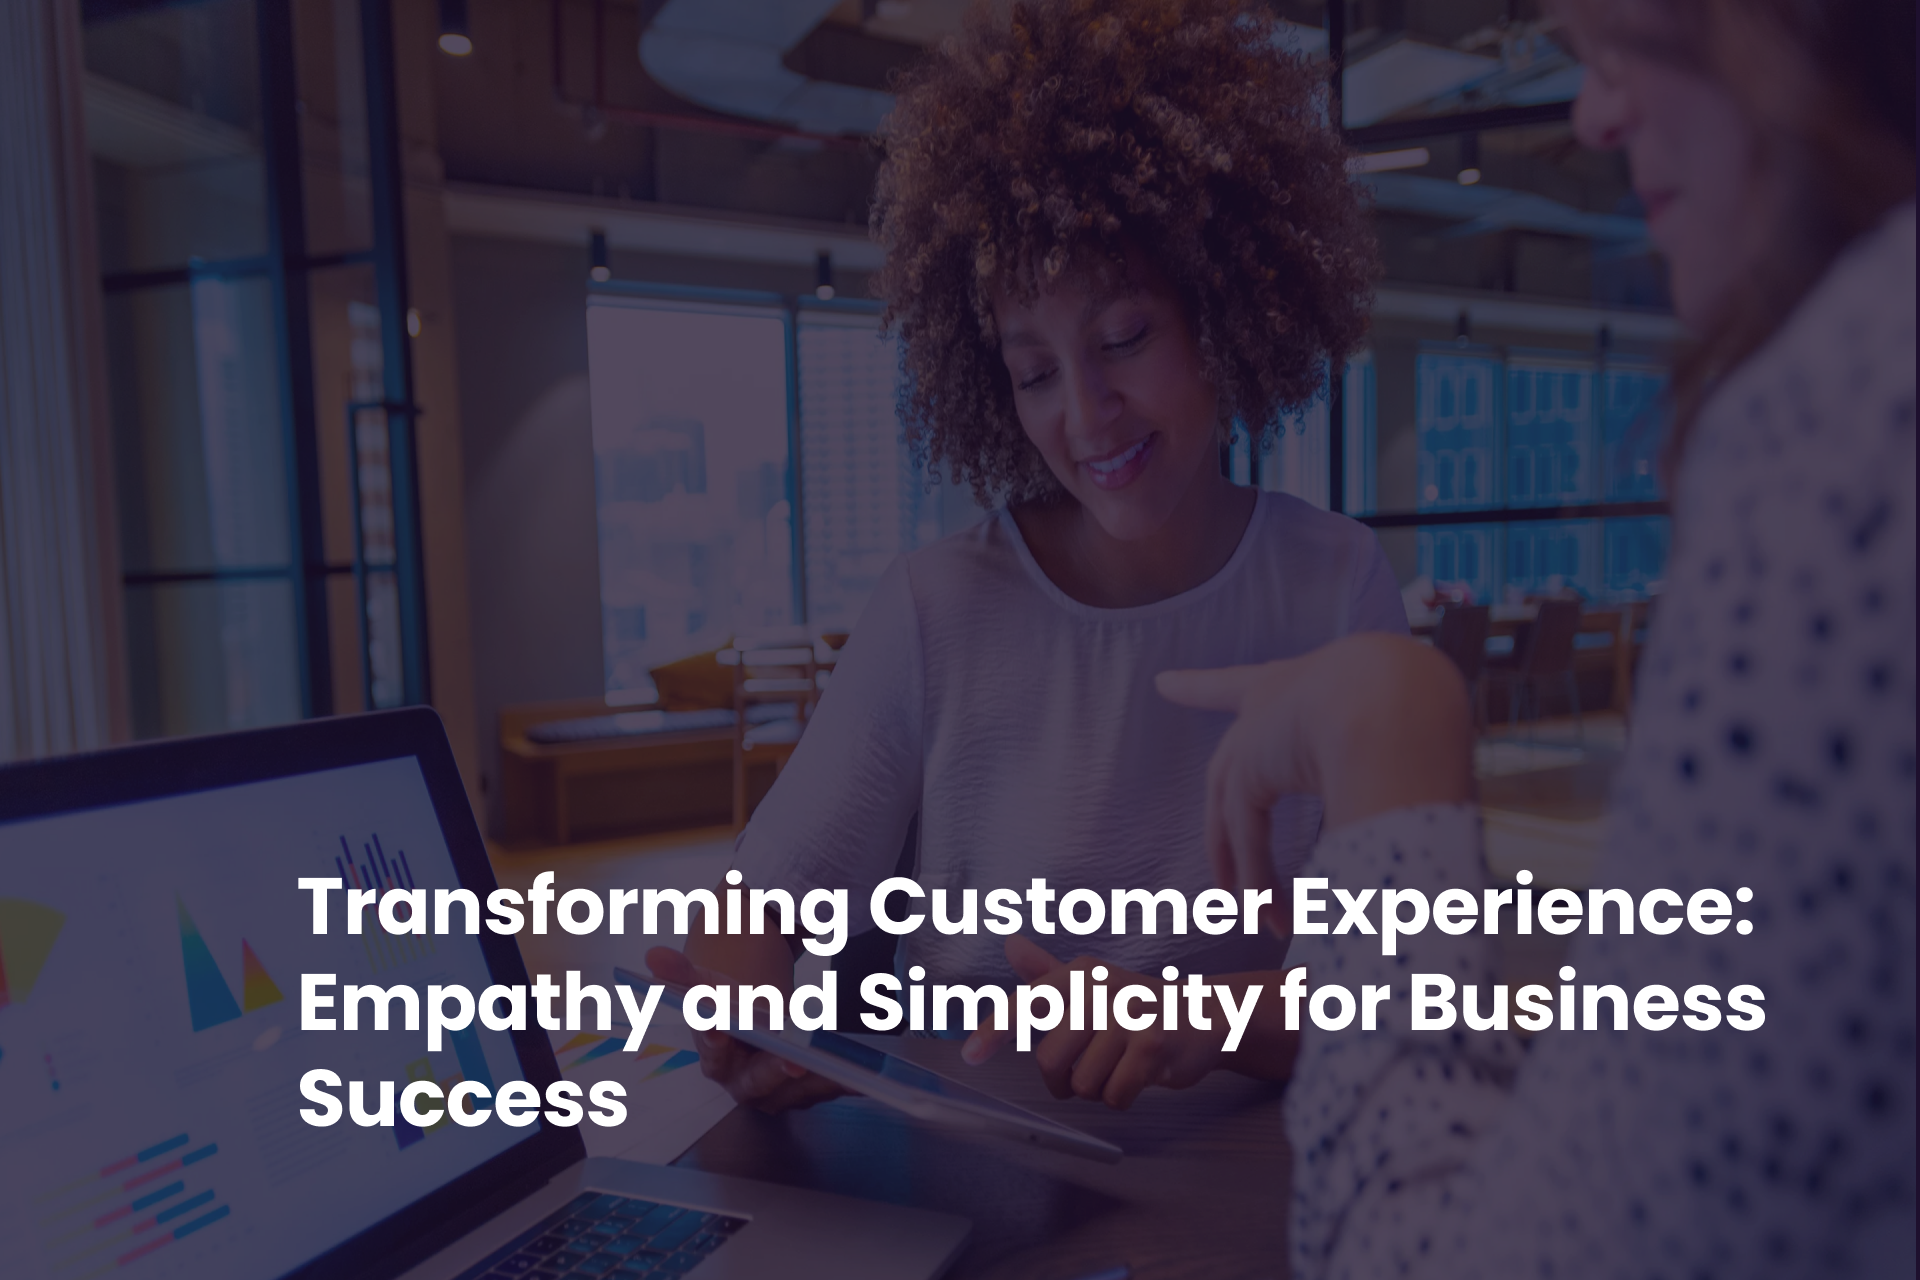 Transforming Customer Experience: Empathy and Simplicity for Business Success